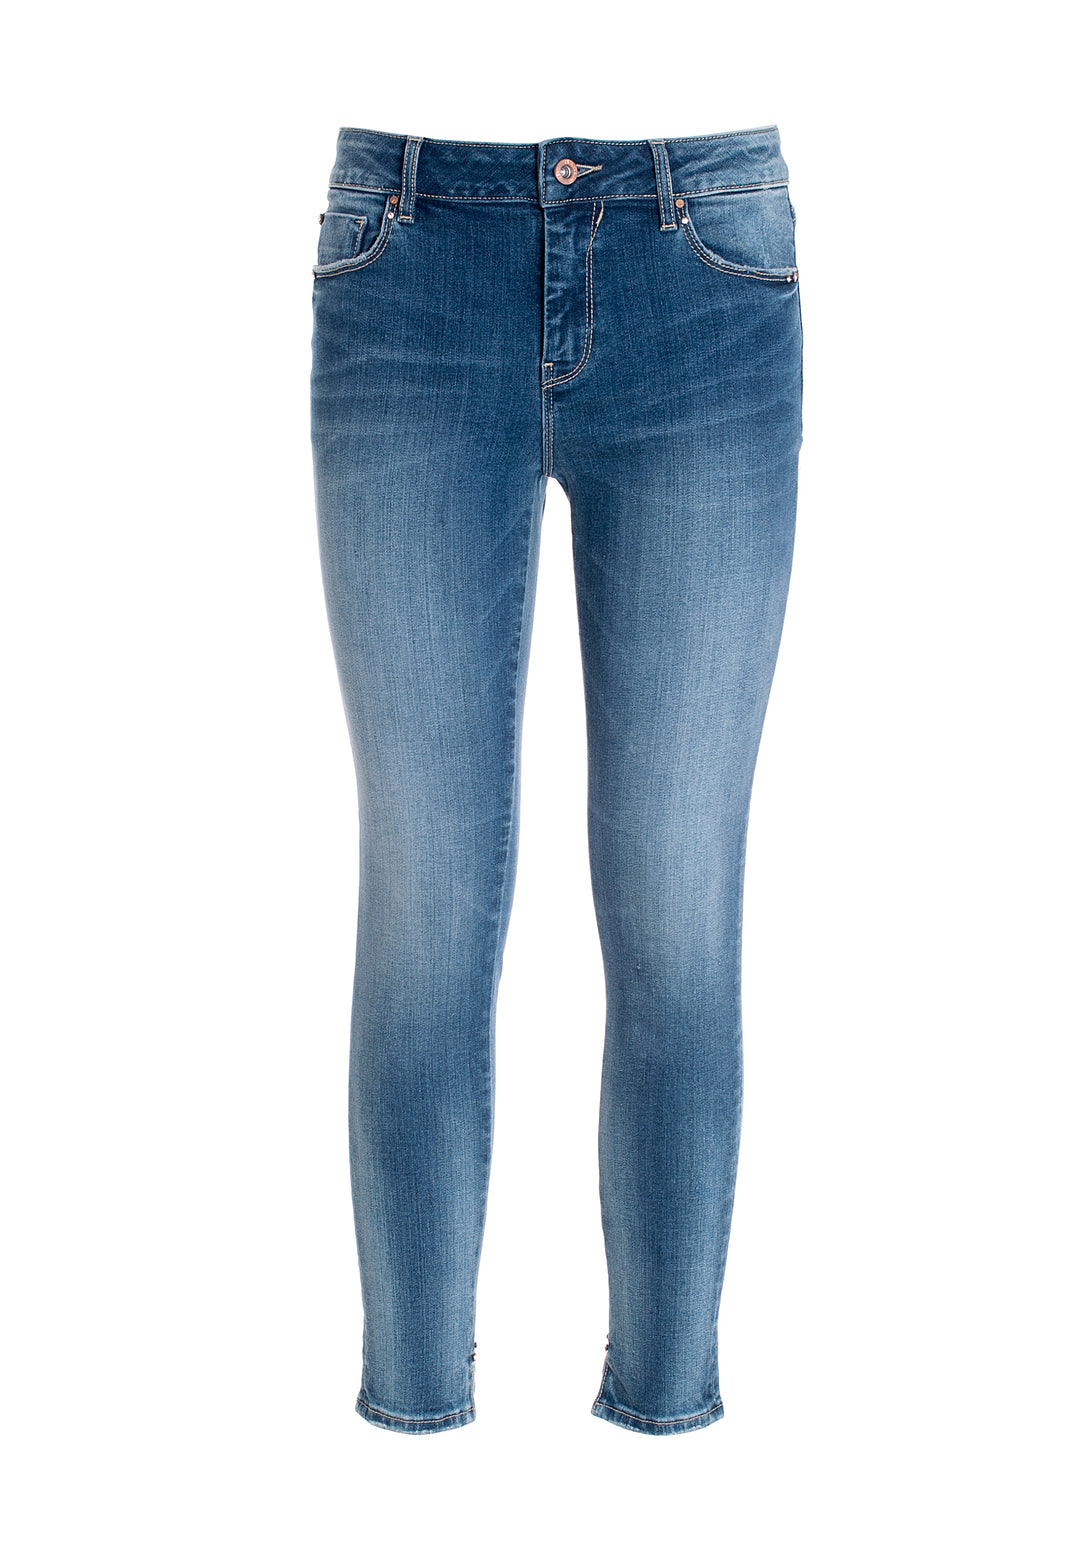 Jeans skinny fit made in denim with middle wash